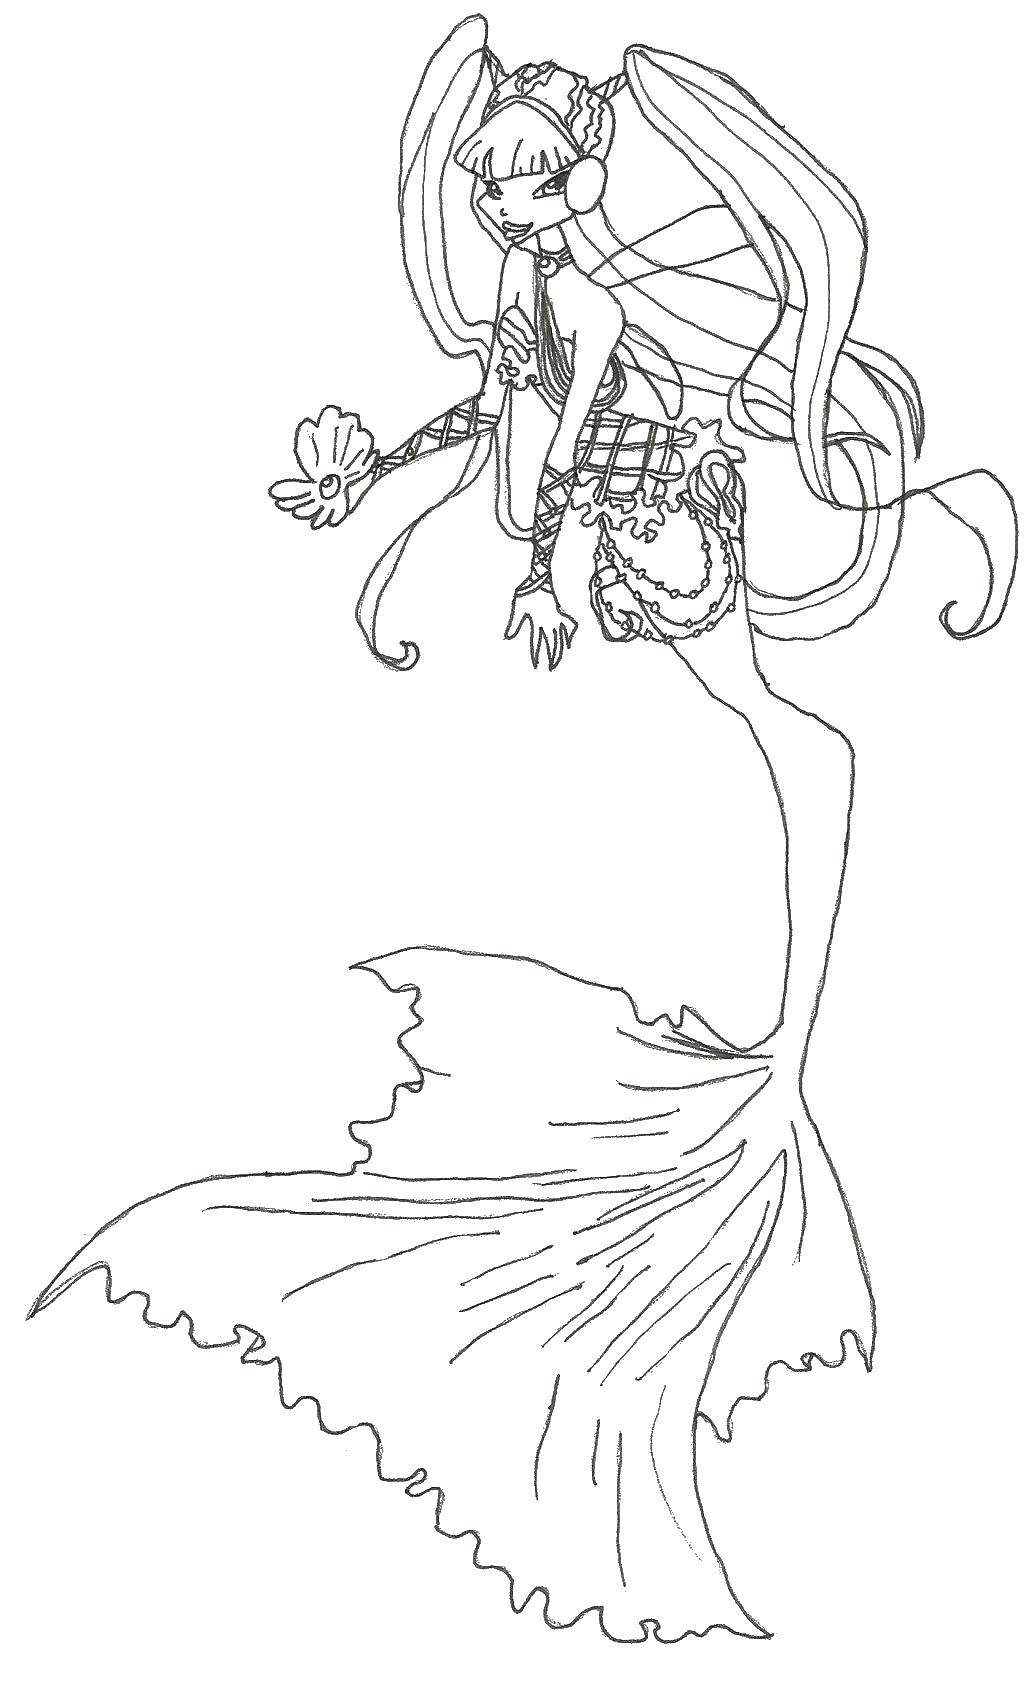 Coloring Girl with a fish tail. Category Winx club. Tags:  girl, tail, fairy.